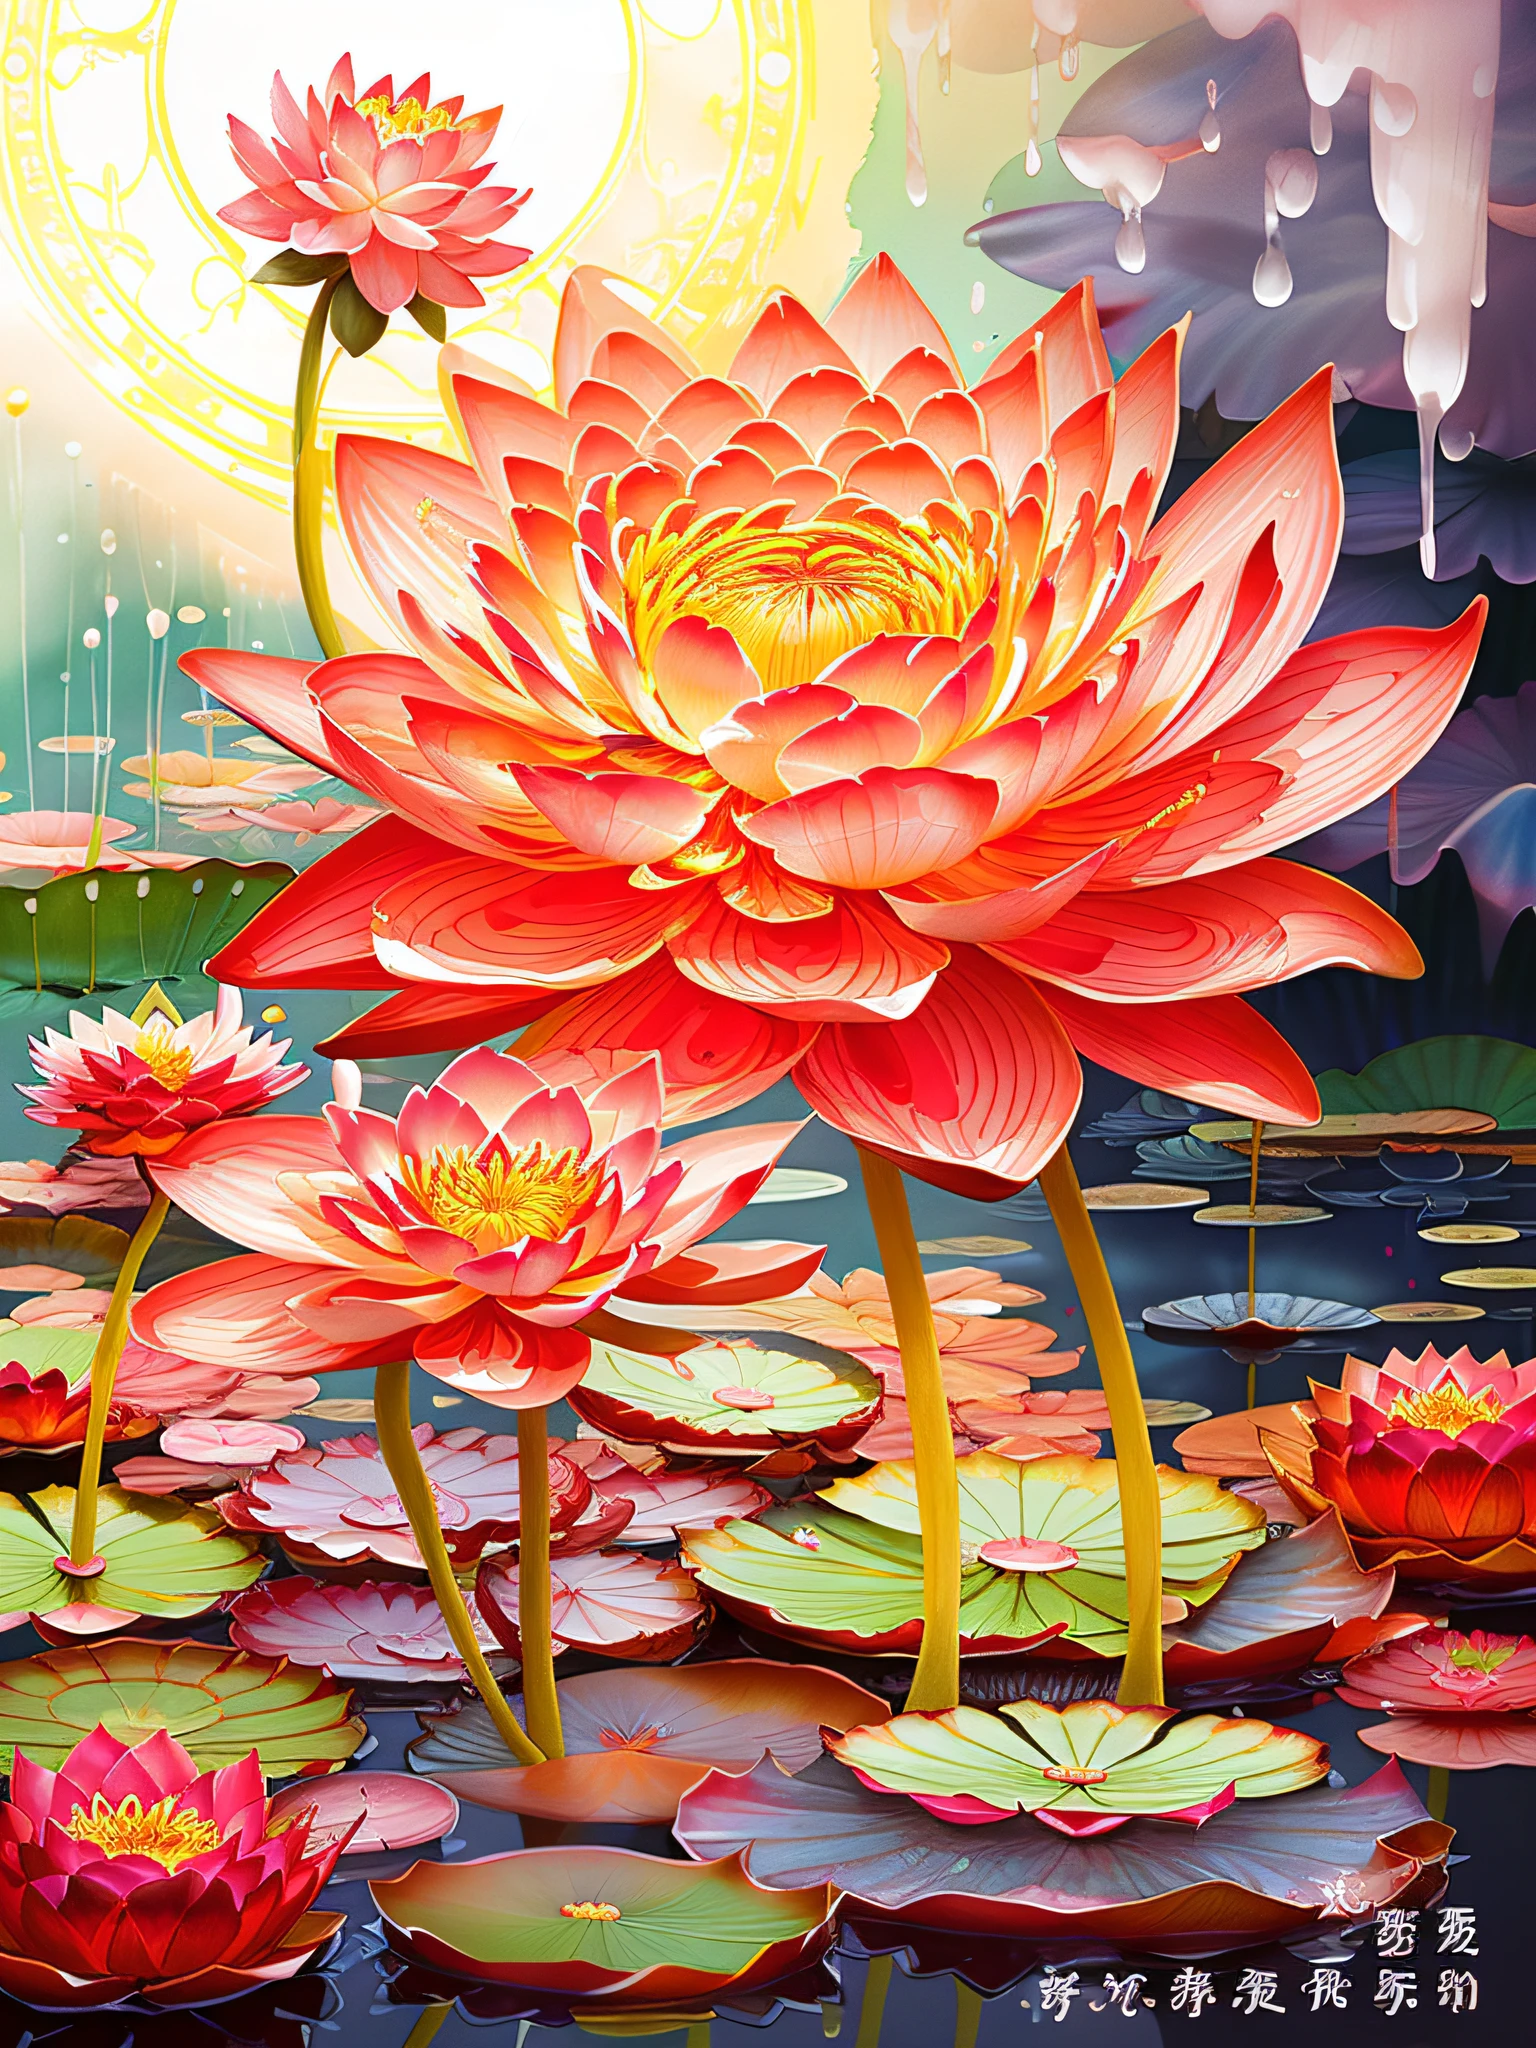 There is a lotus painting in the pond，There are water droplets, standing gracefully upon a lotus, waterlily mecha nymphaea, james jean soft light 4k, james jean soft light 4 k, author：Chen Lin, Beeple and Jeremiah Ketner, with lotus flowers, by Yang J, A beautiful artwork illustration, author：Park Hua, Pink Lotus Queen